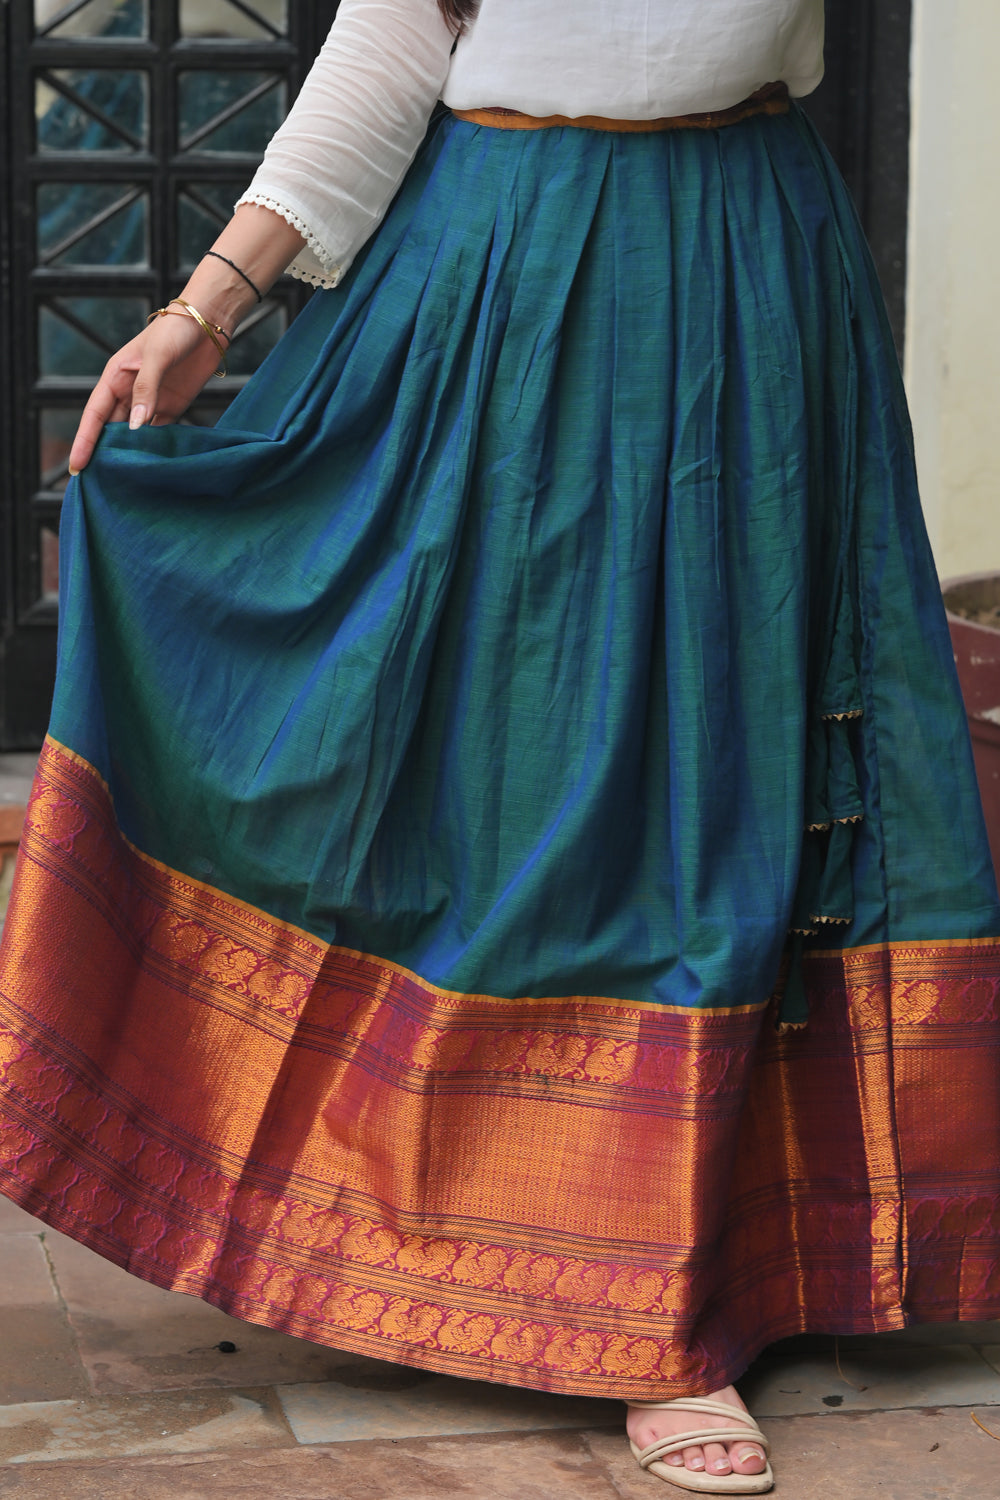 Moor Hues - Peacock Blue Green Pleated skirt with White Georgette Top | Made To Order